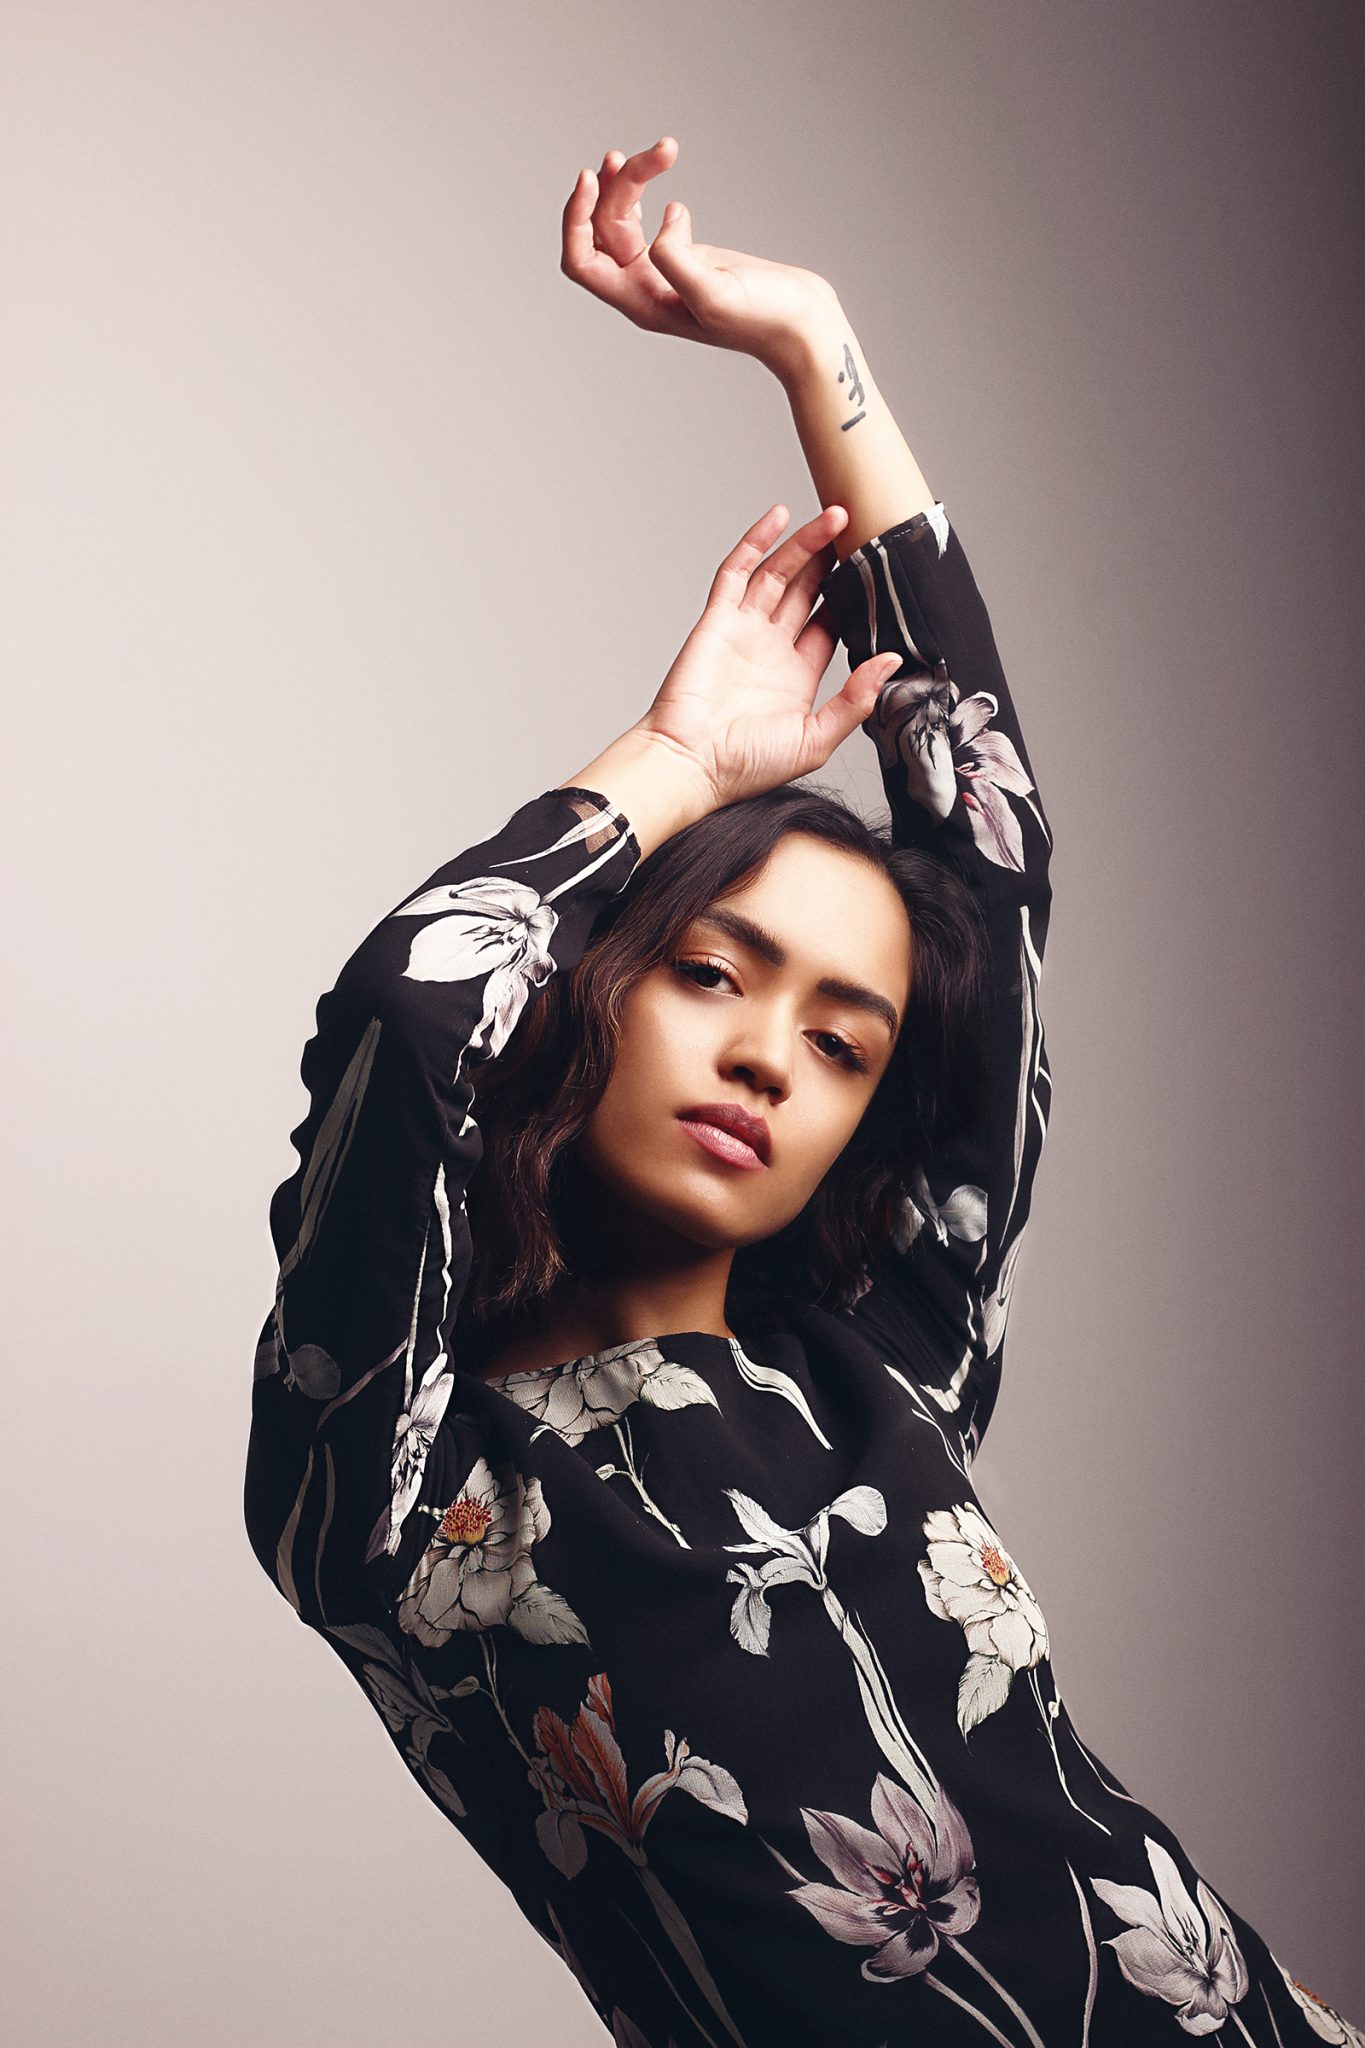 These New Images Of Roksana S Are AMAZING! | BMA Models Blog